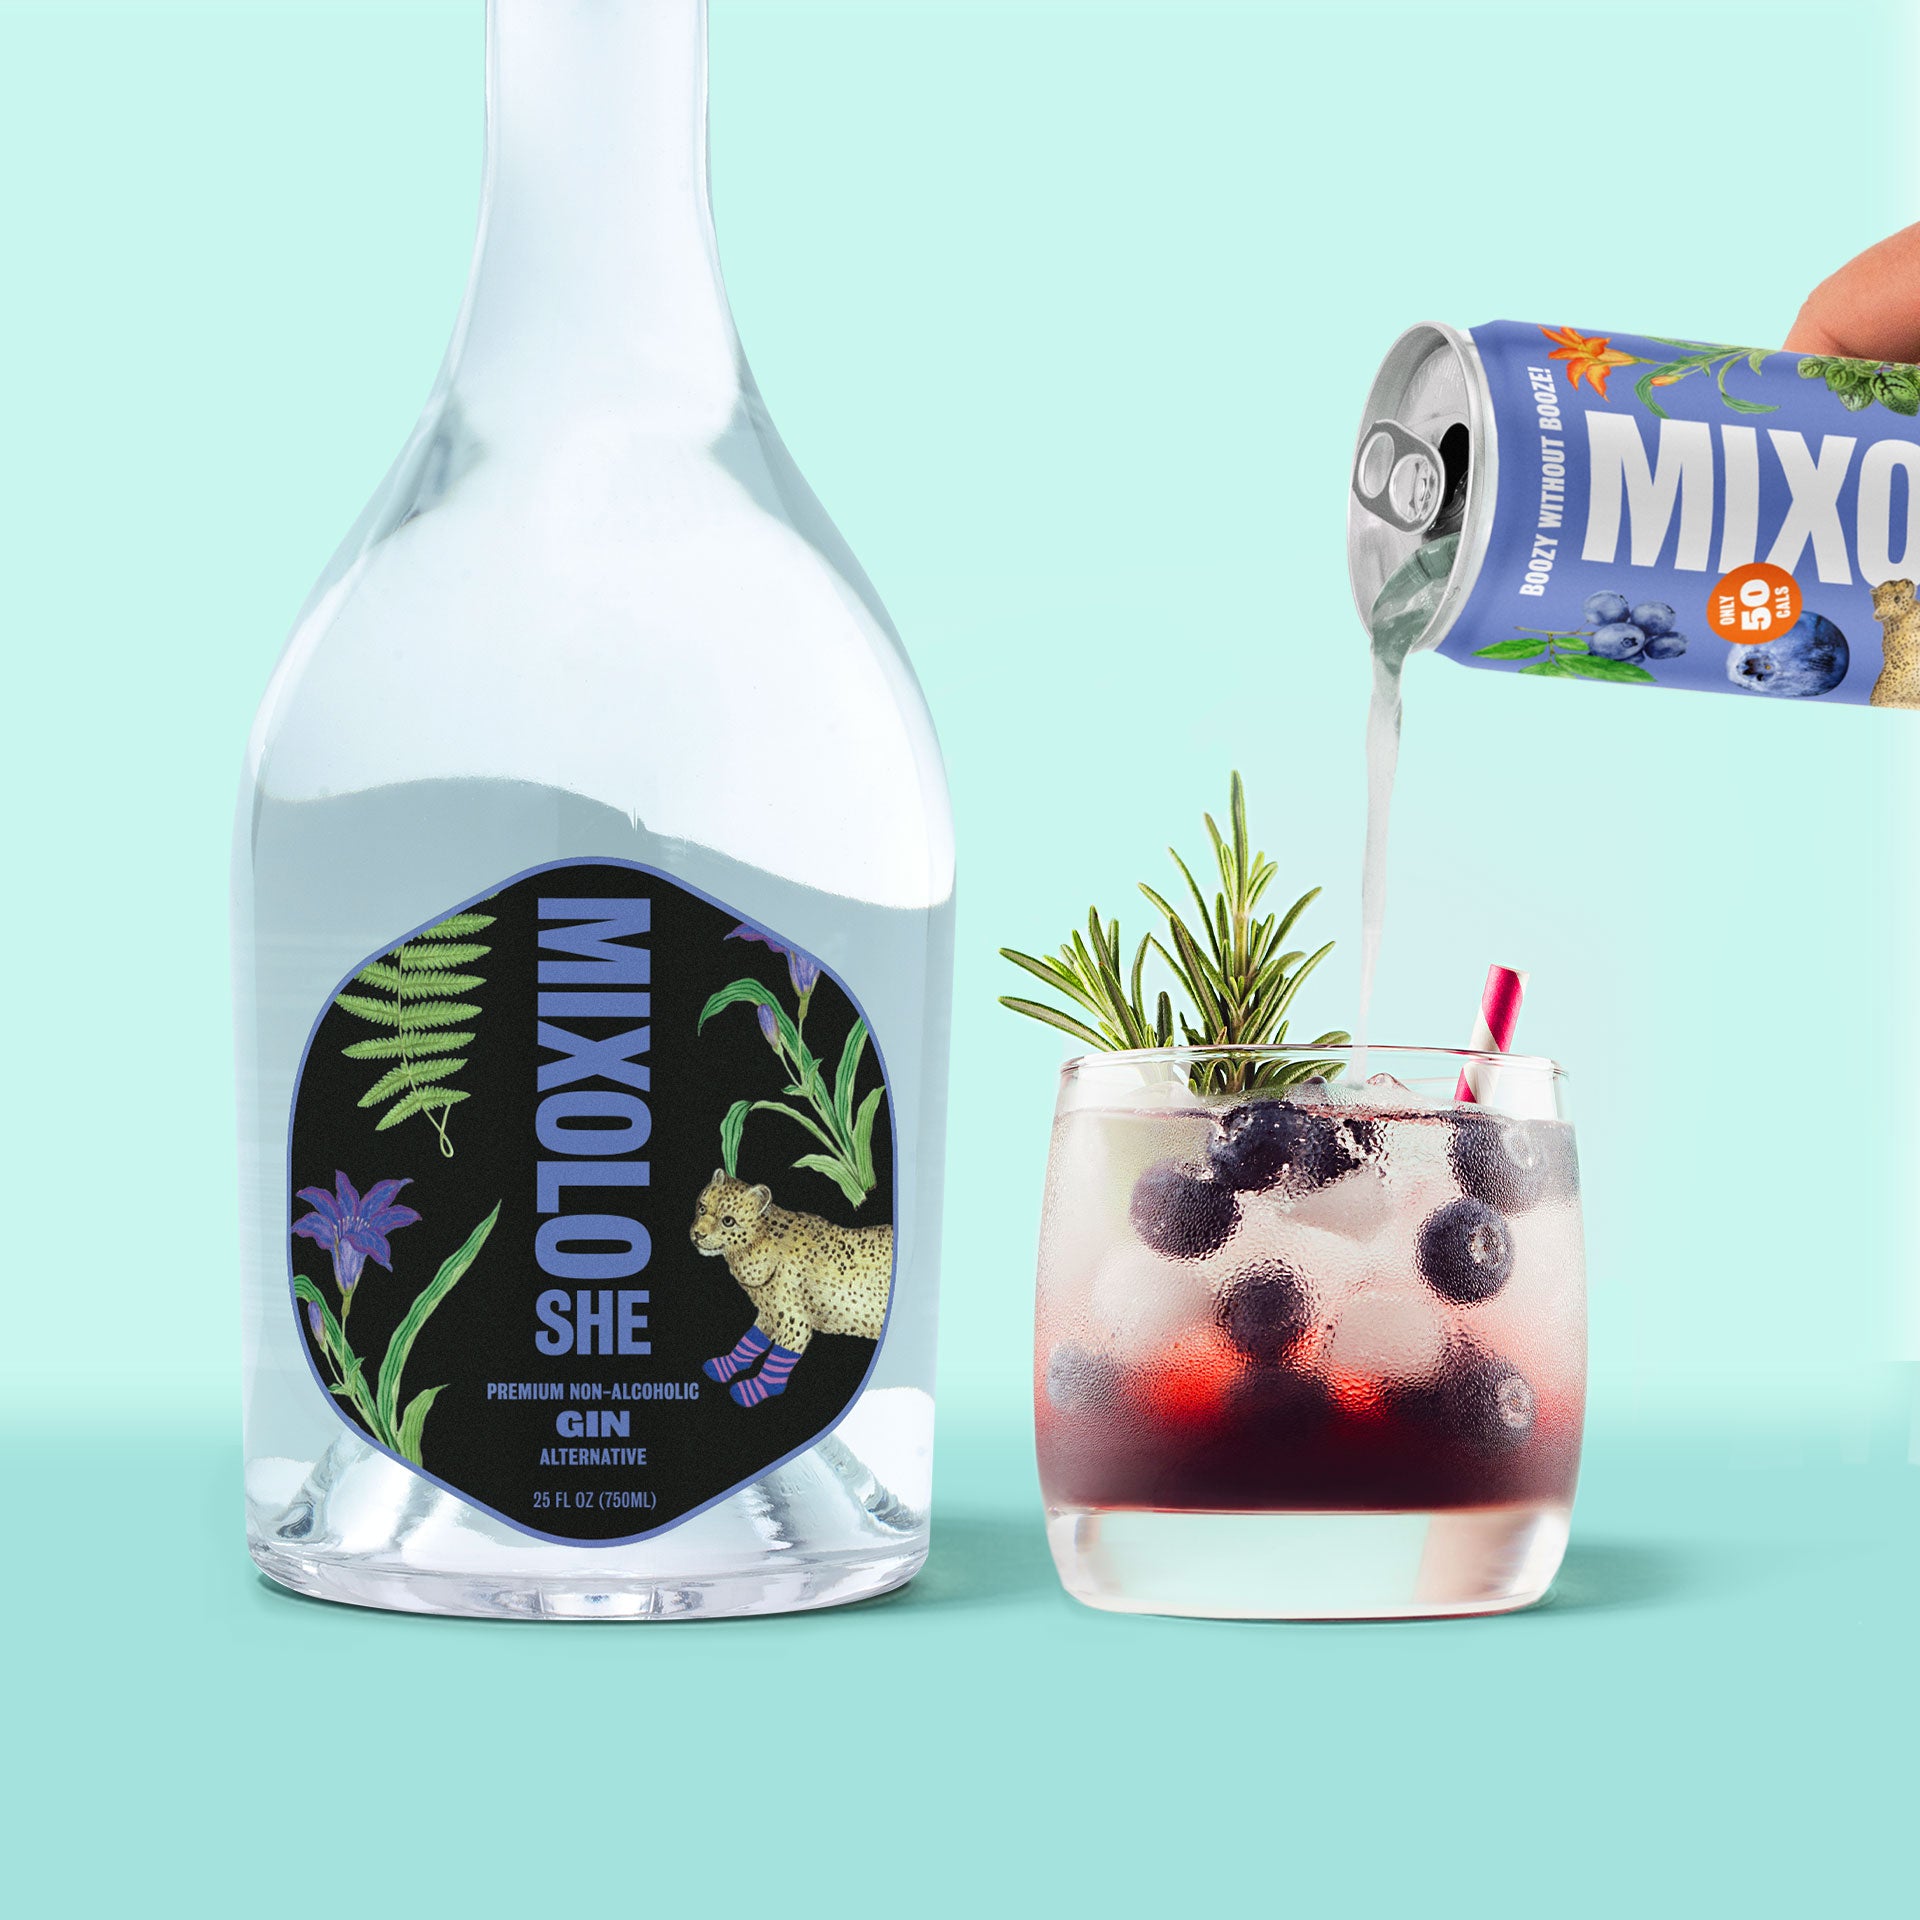 Mixoloshe - with our NA Spirits you can now enjoy your favorite cocktails as delicious non-alcoholic option